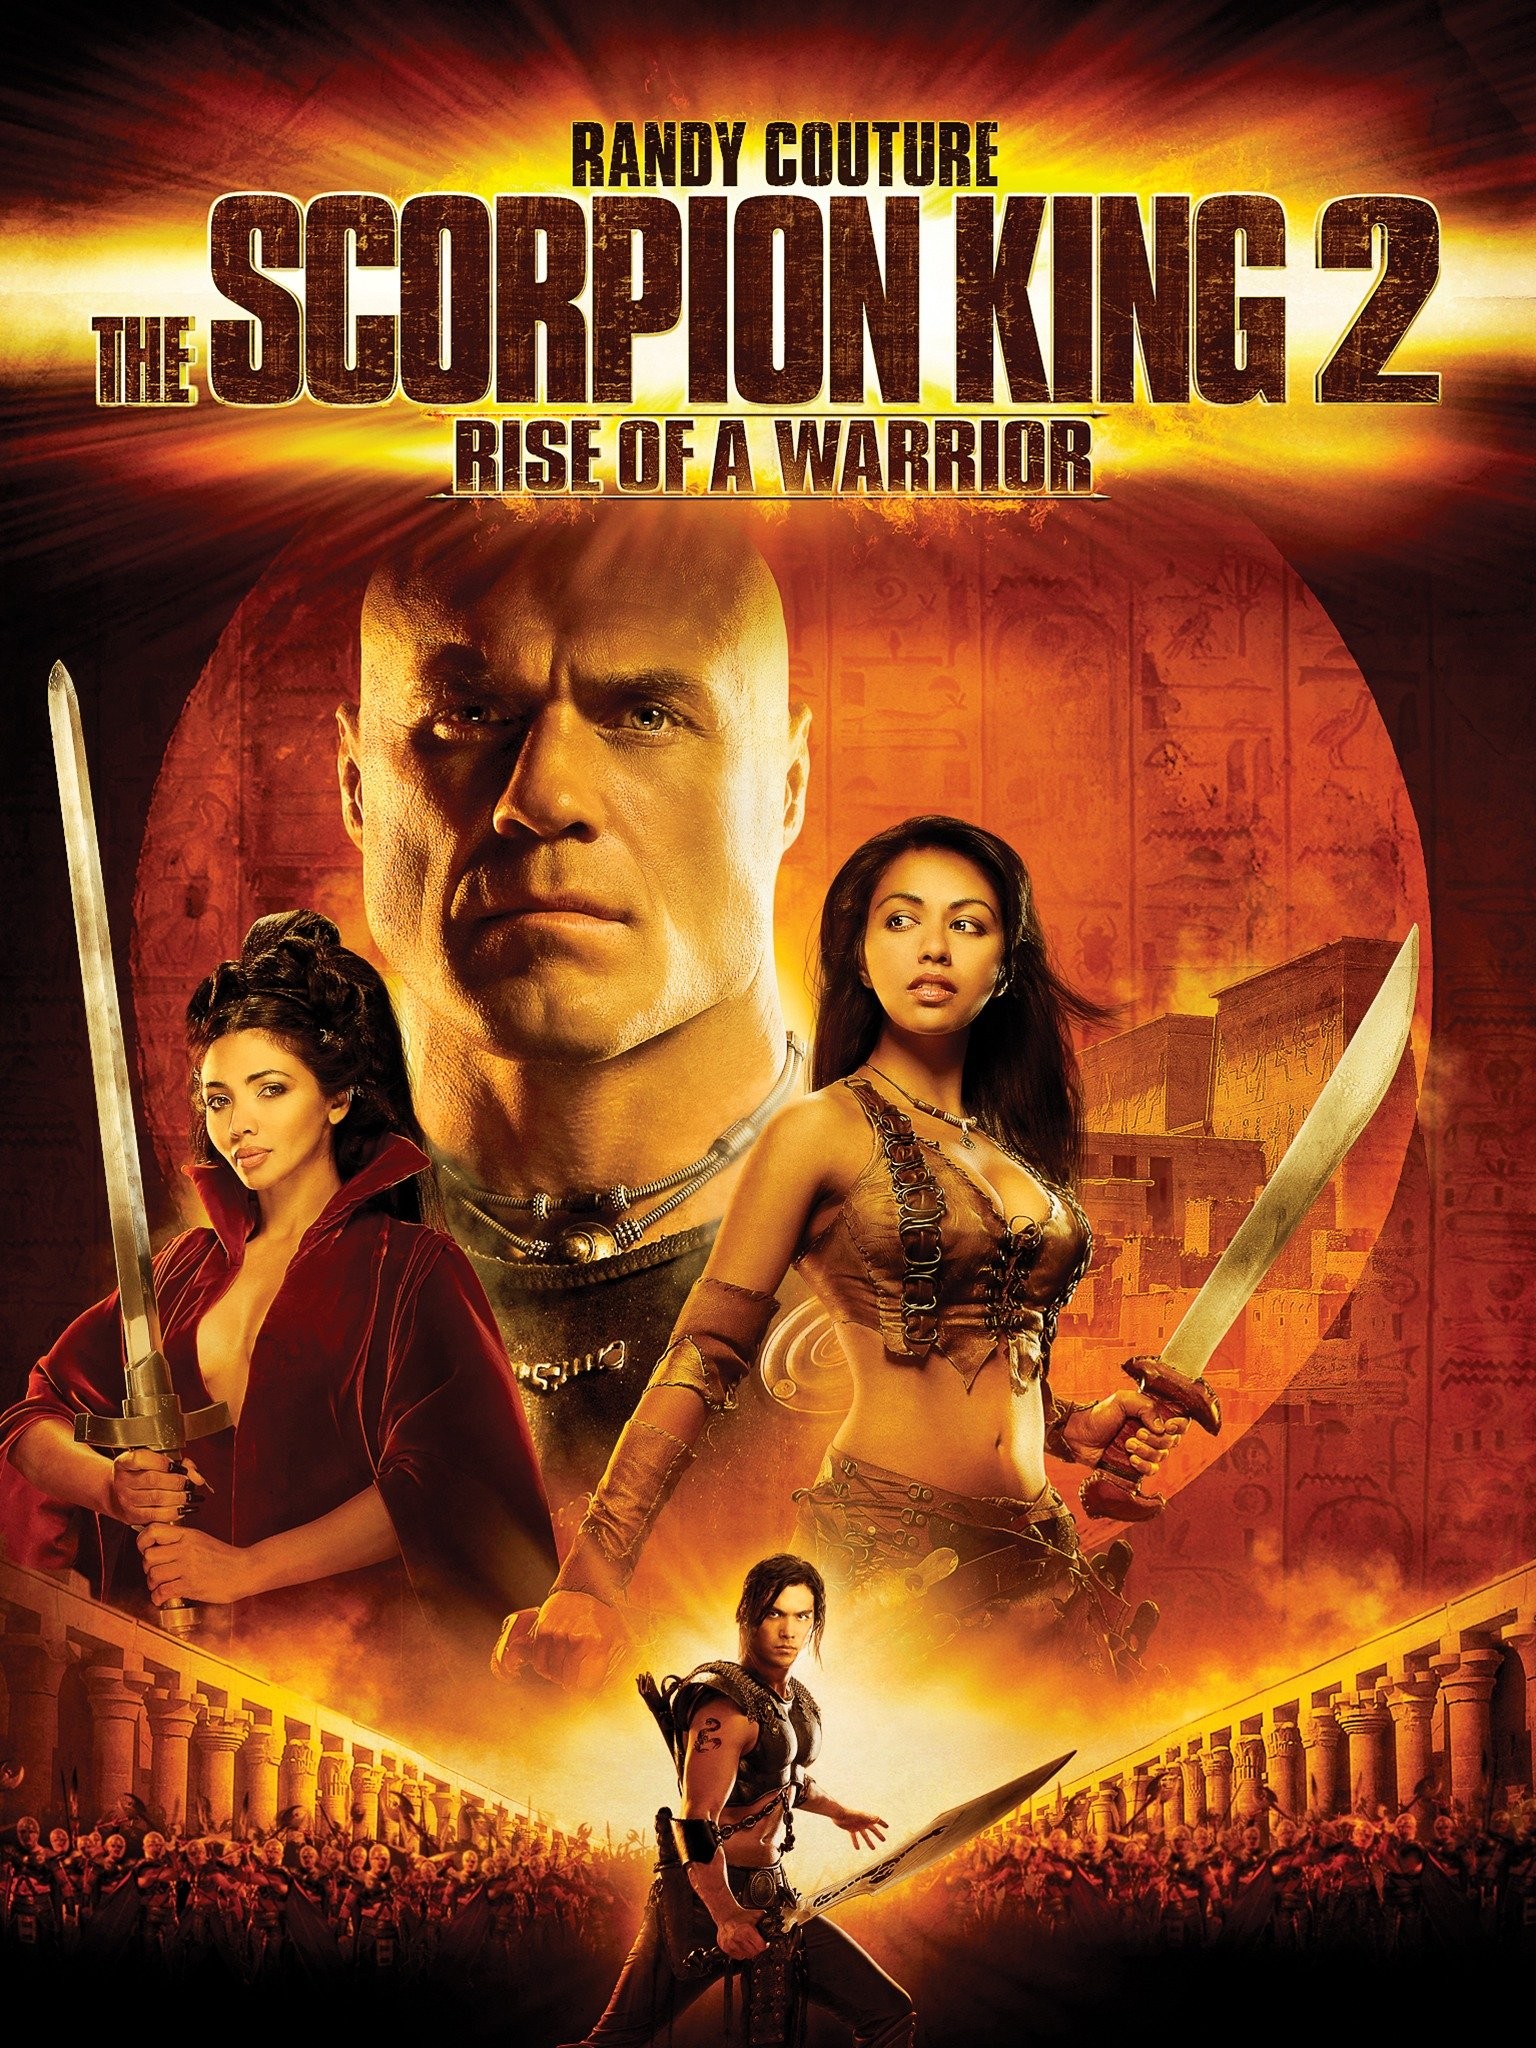 becky tarrant recommends girl in scorpion king pic